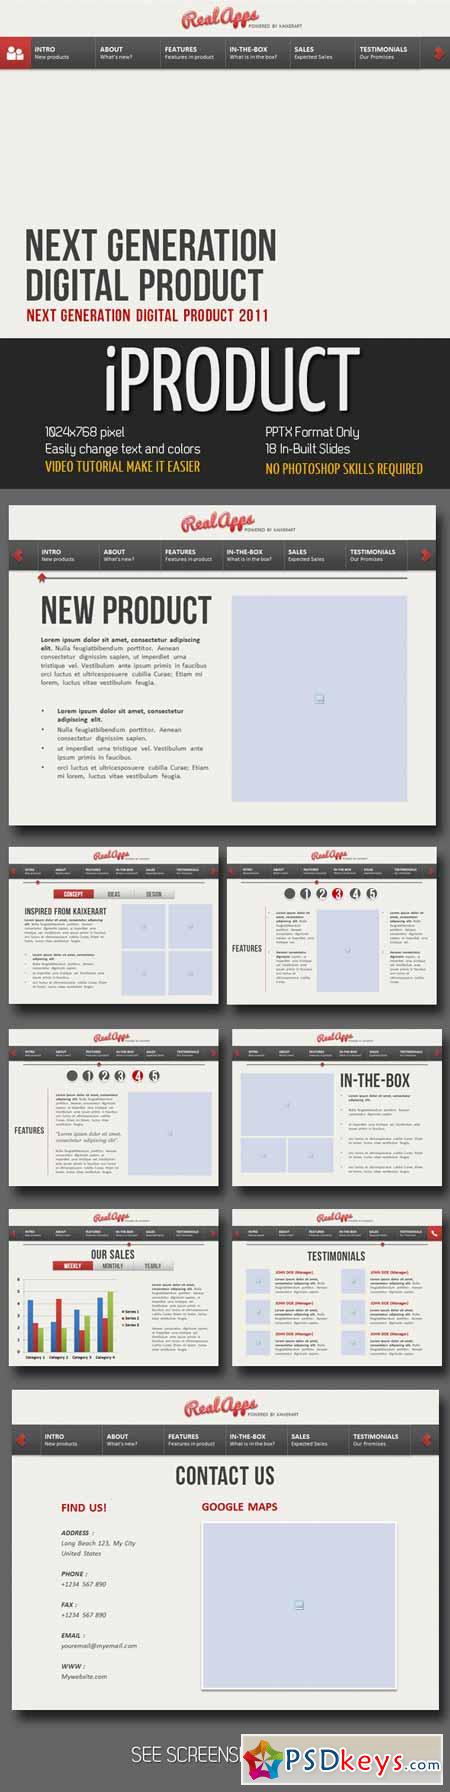 iProduct PowerPoint Presentation 305612